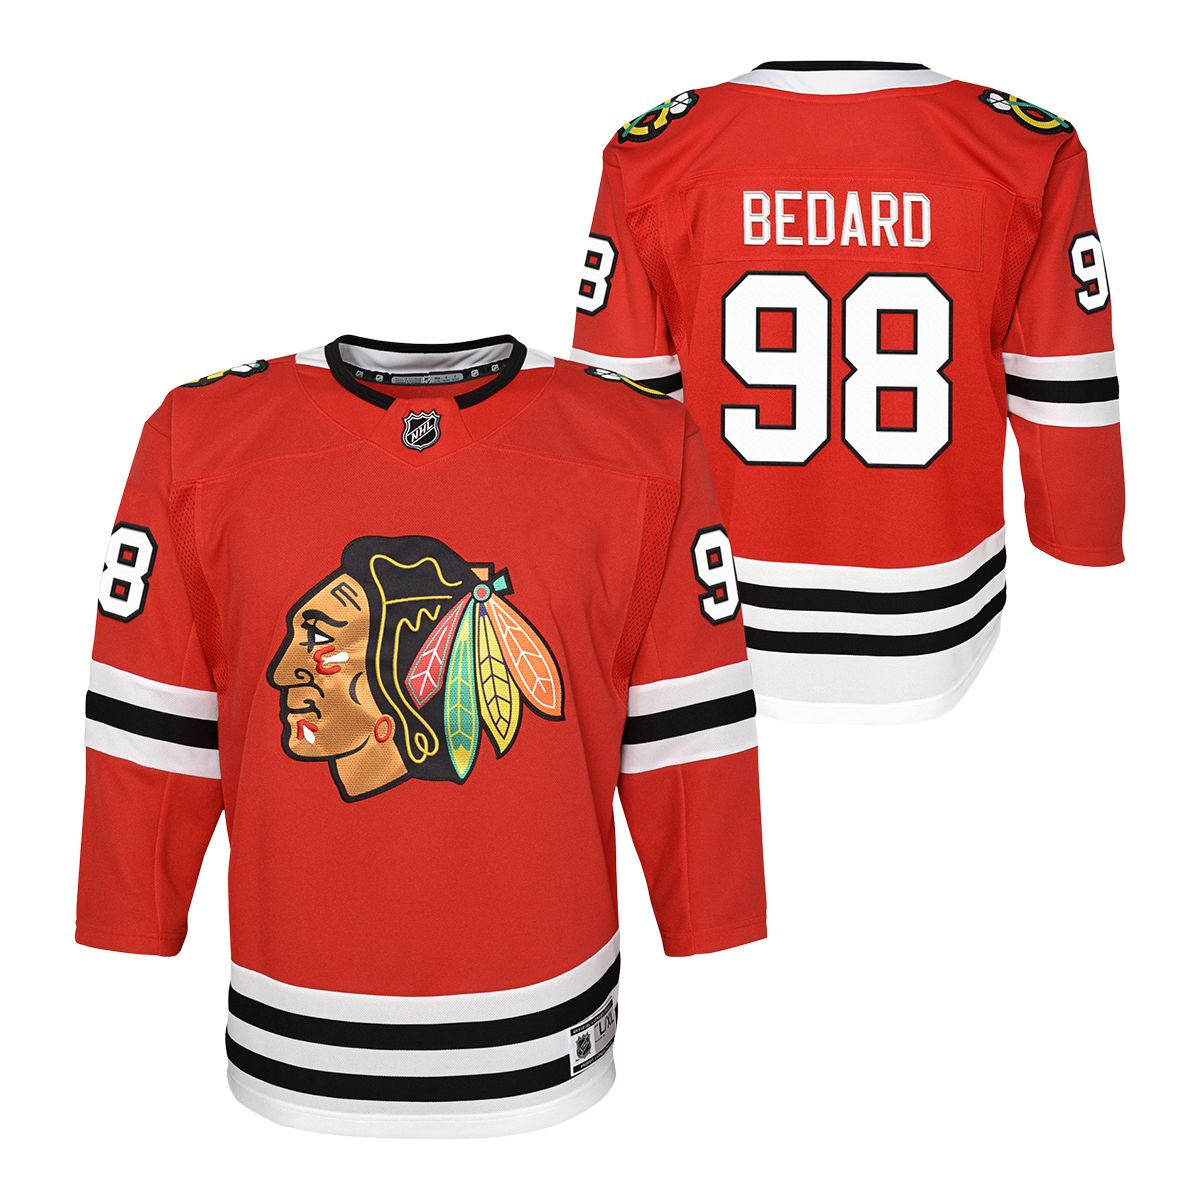 Outerstuff Youth Connor Bedard Red Chicago Blackhawks Home Replica Player Jersey Size: Small/Medium